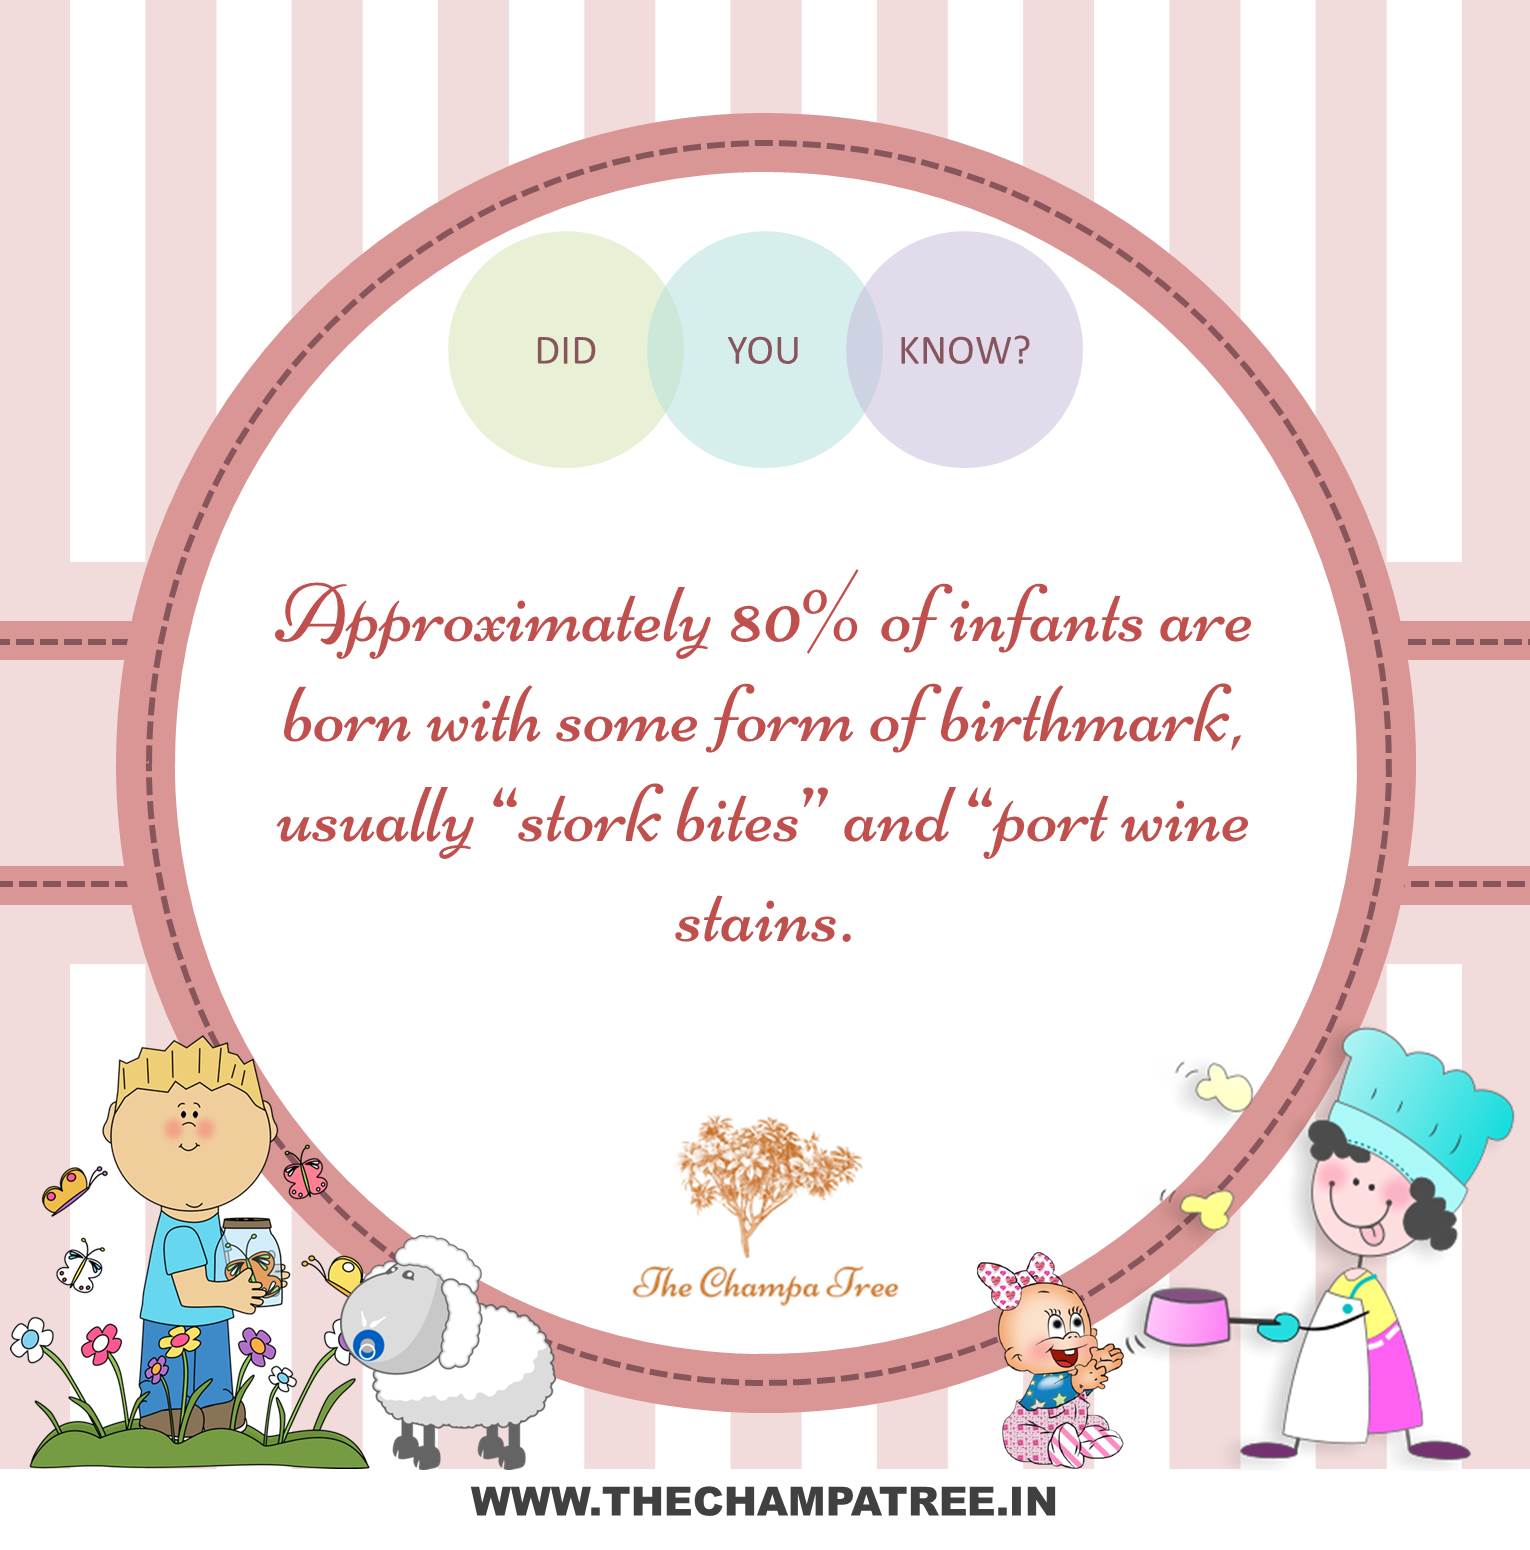 Did You Know Facts - Baby birthmarks